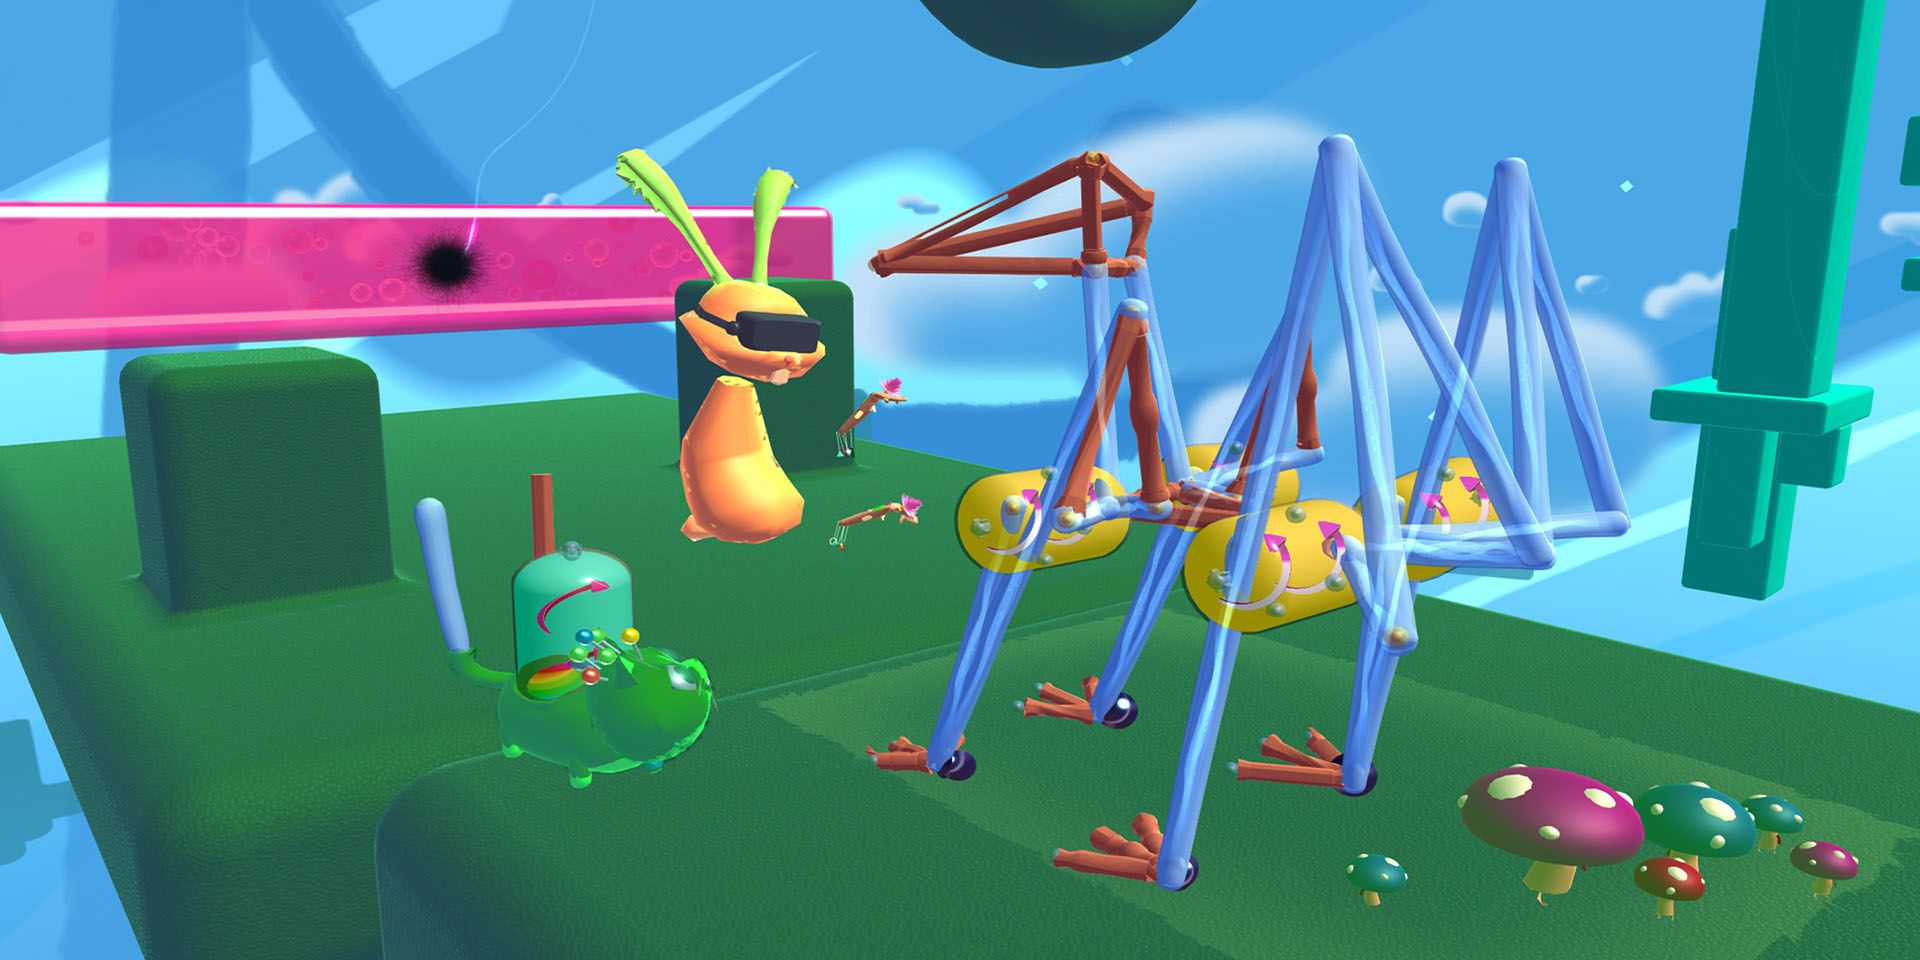 Fantastic Contraptions promo image showcasing a bunny character in VR making a strange four legged vehicle in a jelly-like world